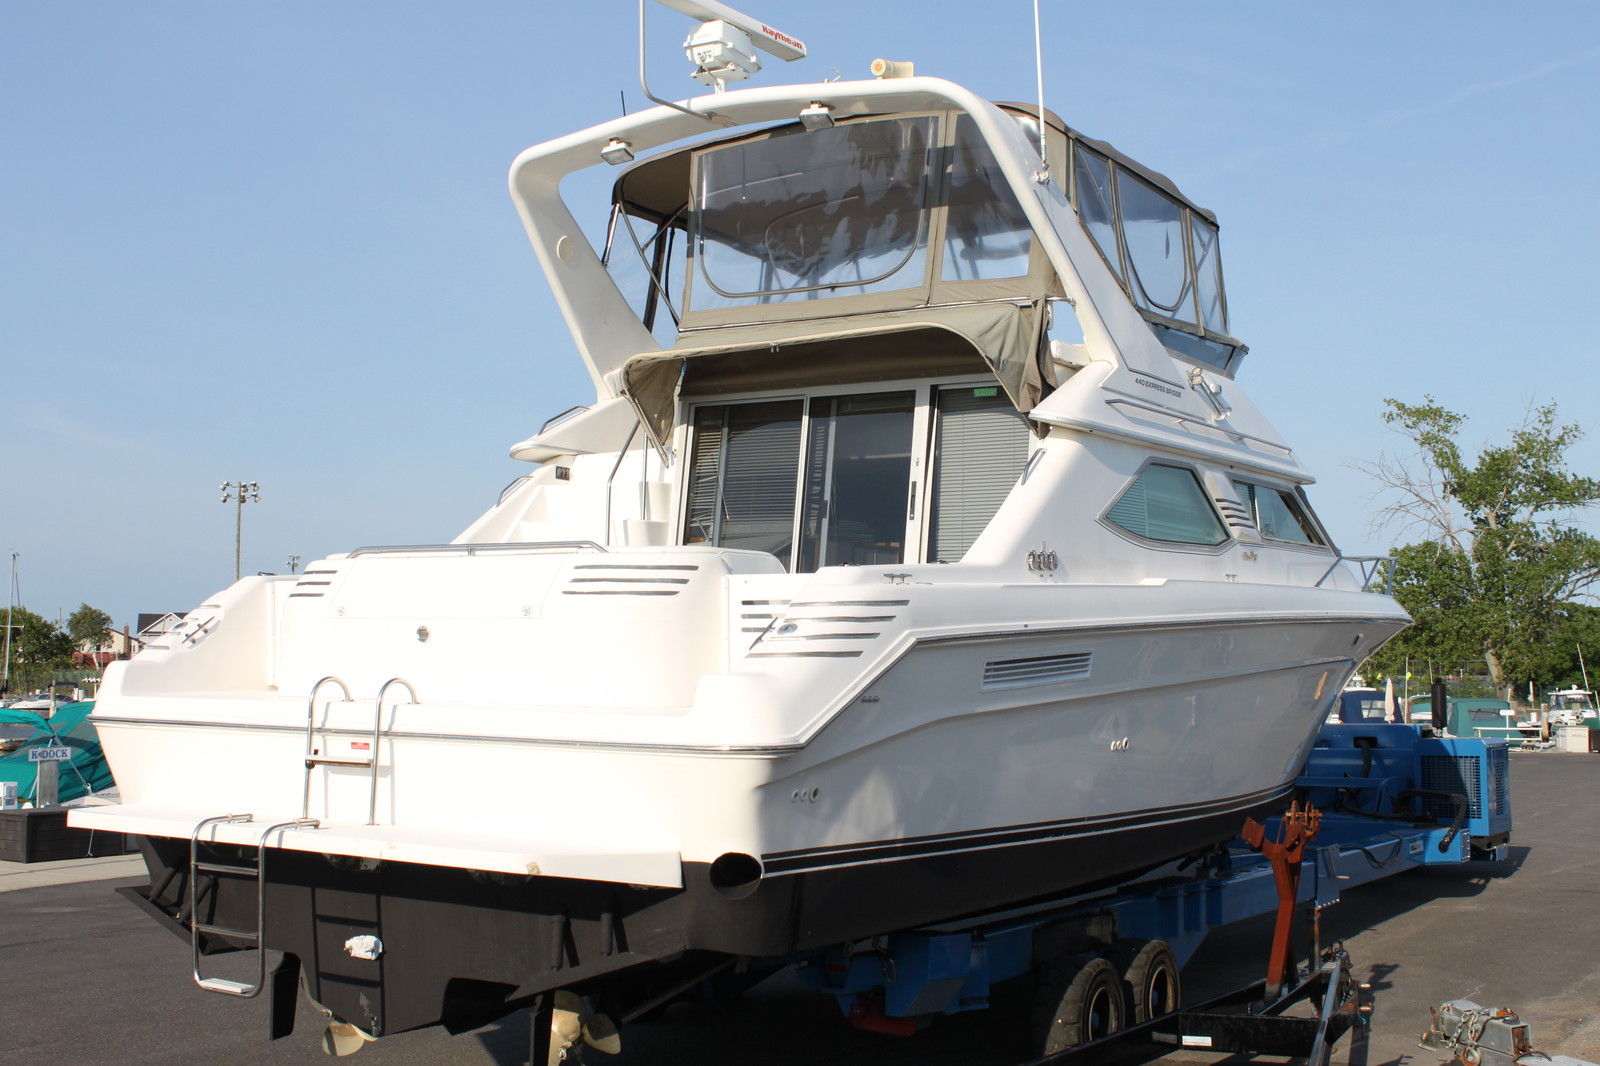 Sea Ray 440 Express Bridge 1993 for sale for $46,900 